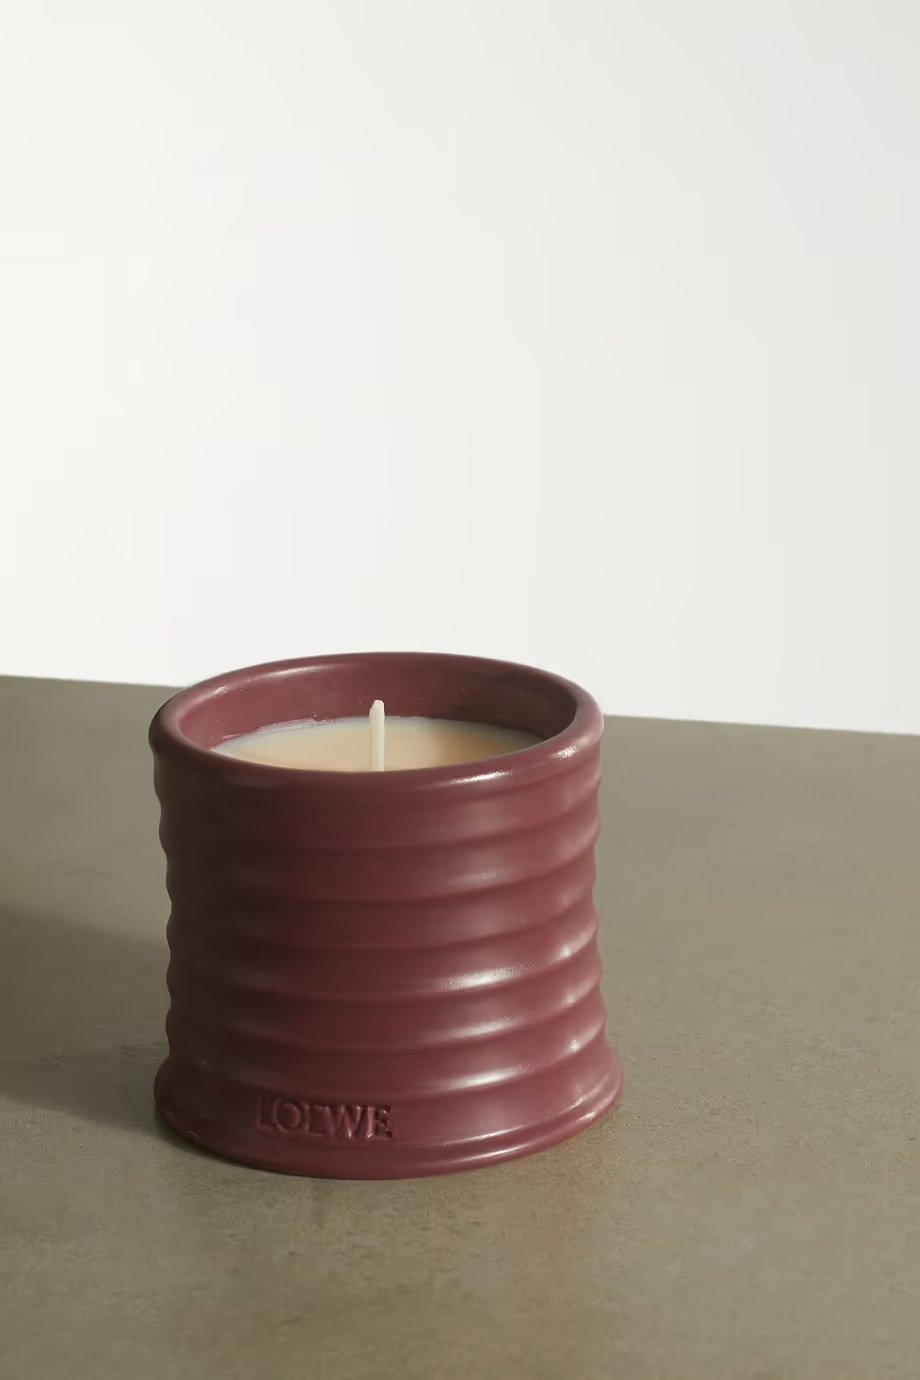 Loewe Scented Candle